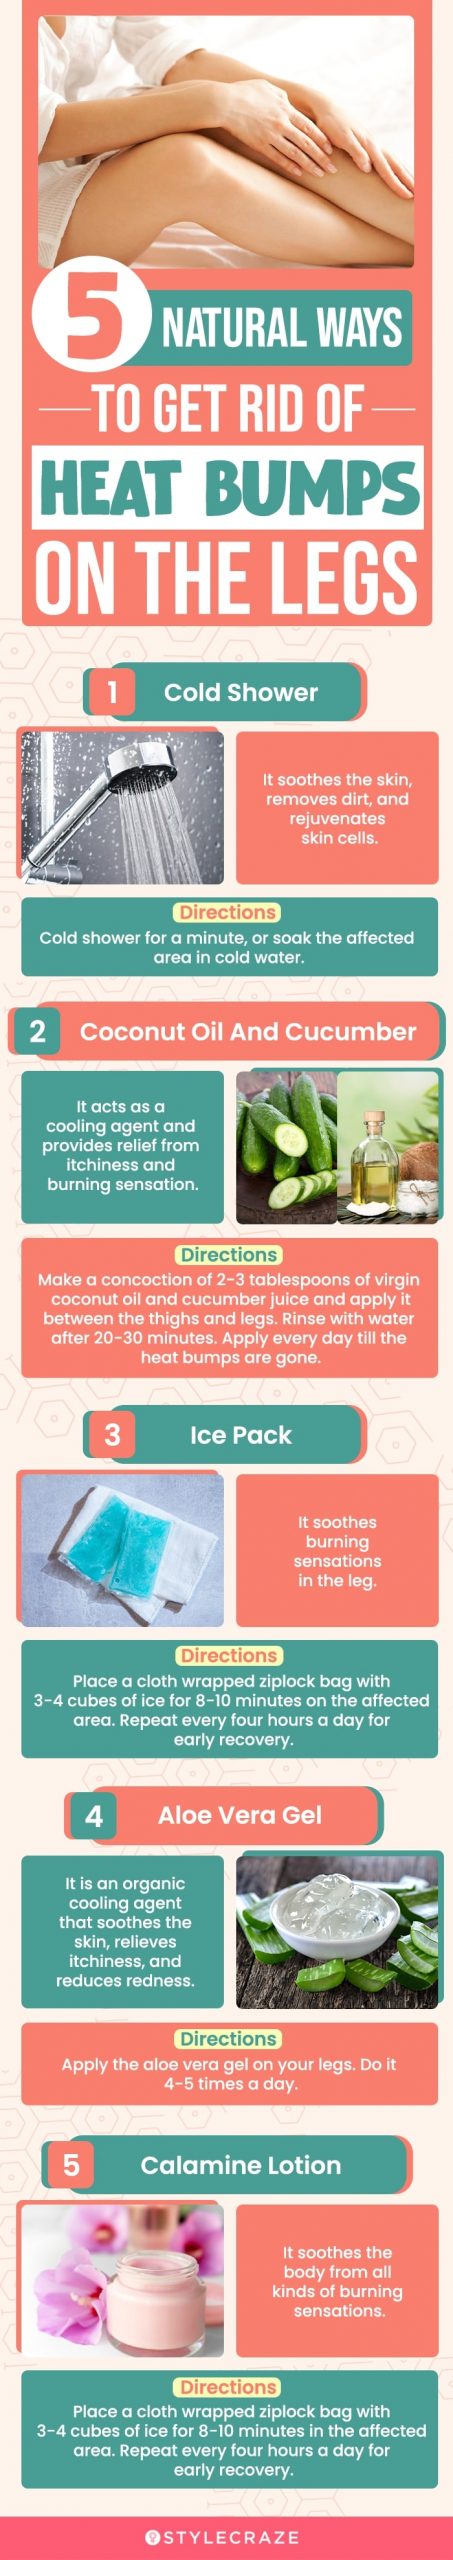 5 natural ways to get rid of heat bumps on the legs (infographic)